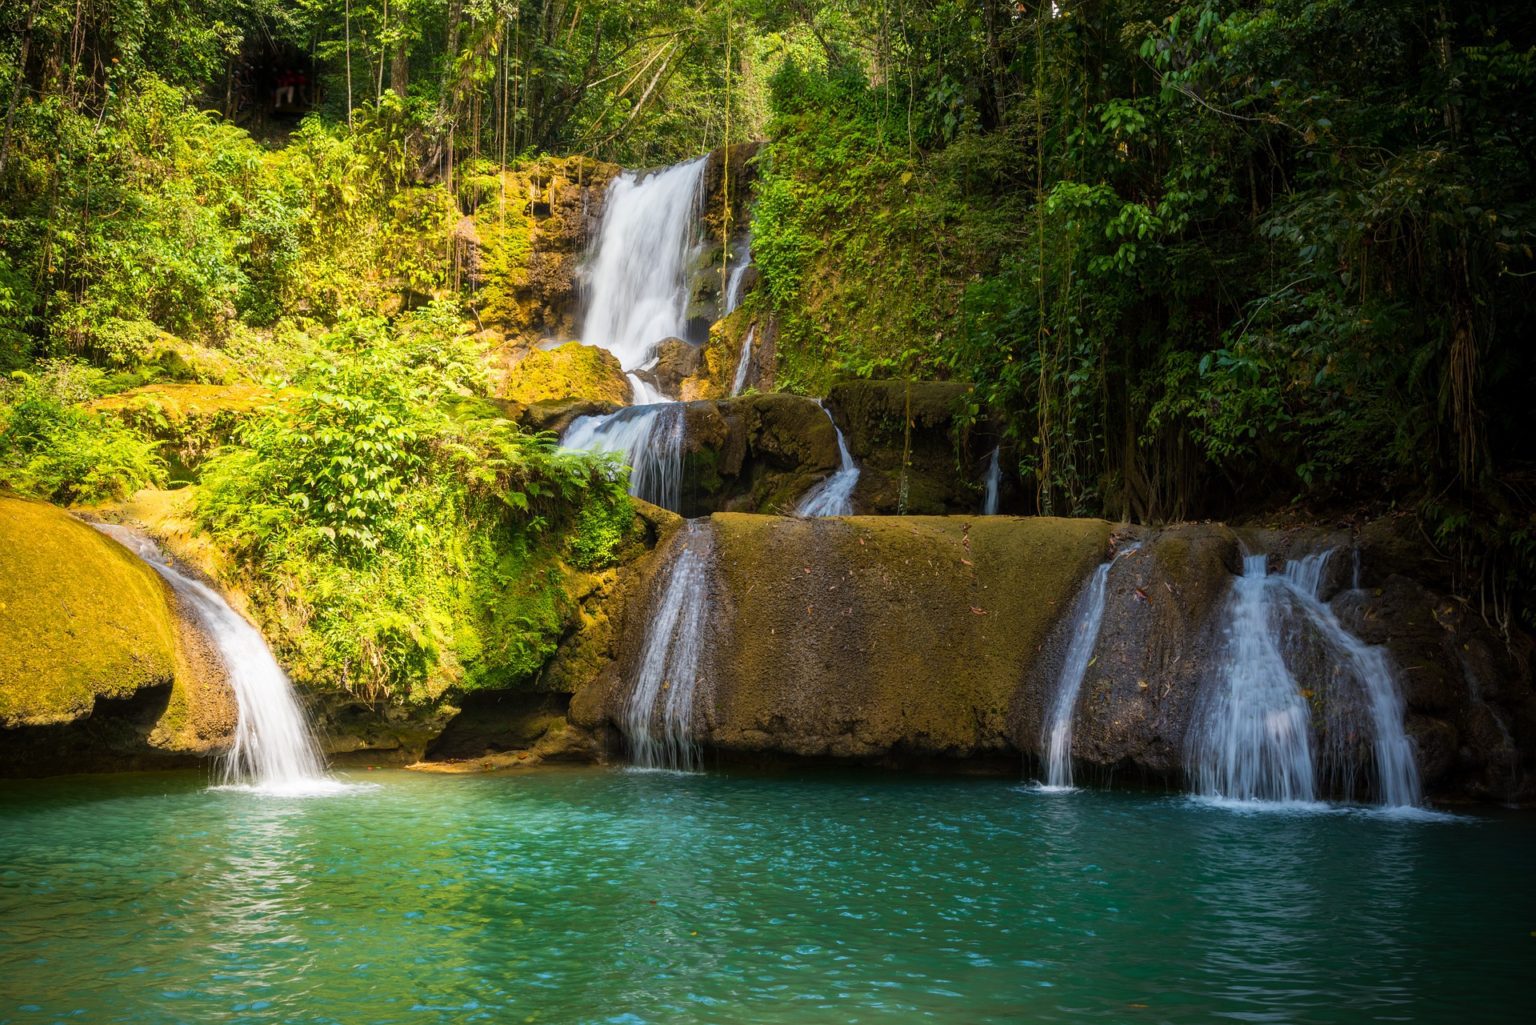 20 Amazing Things to Do in Jamaica - A Couple Days Travel